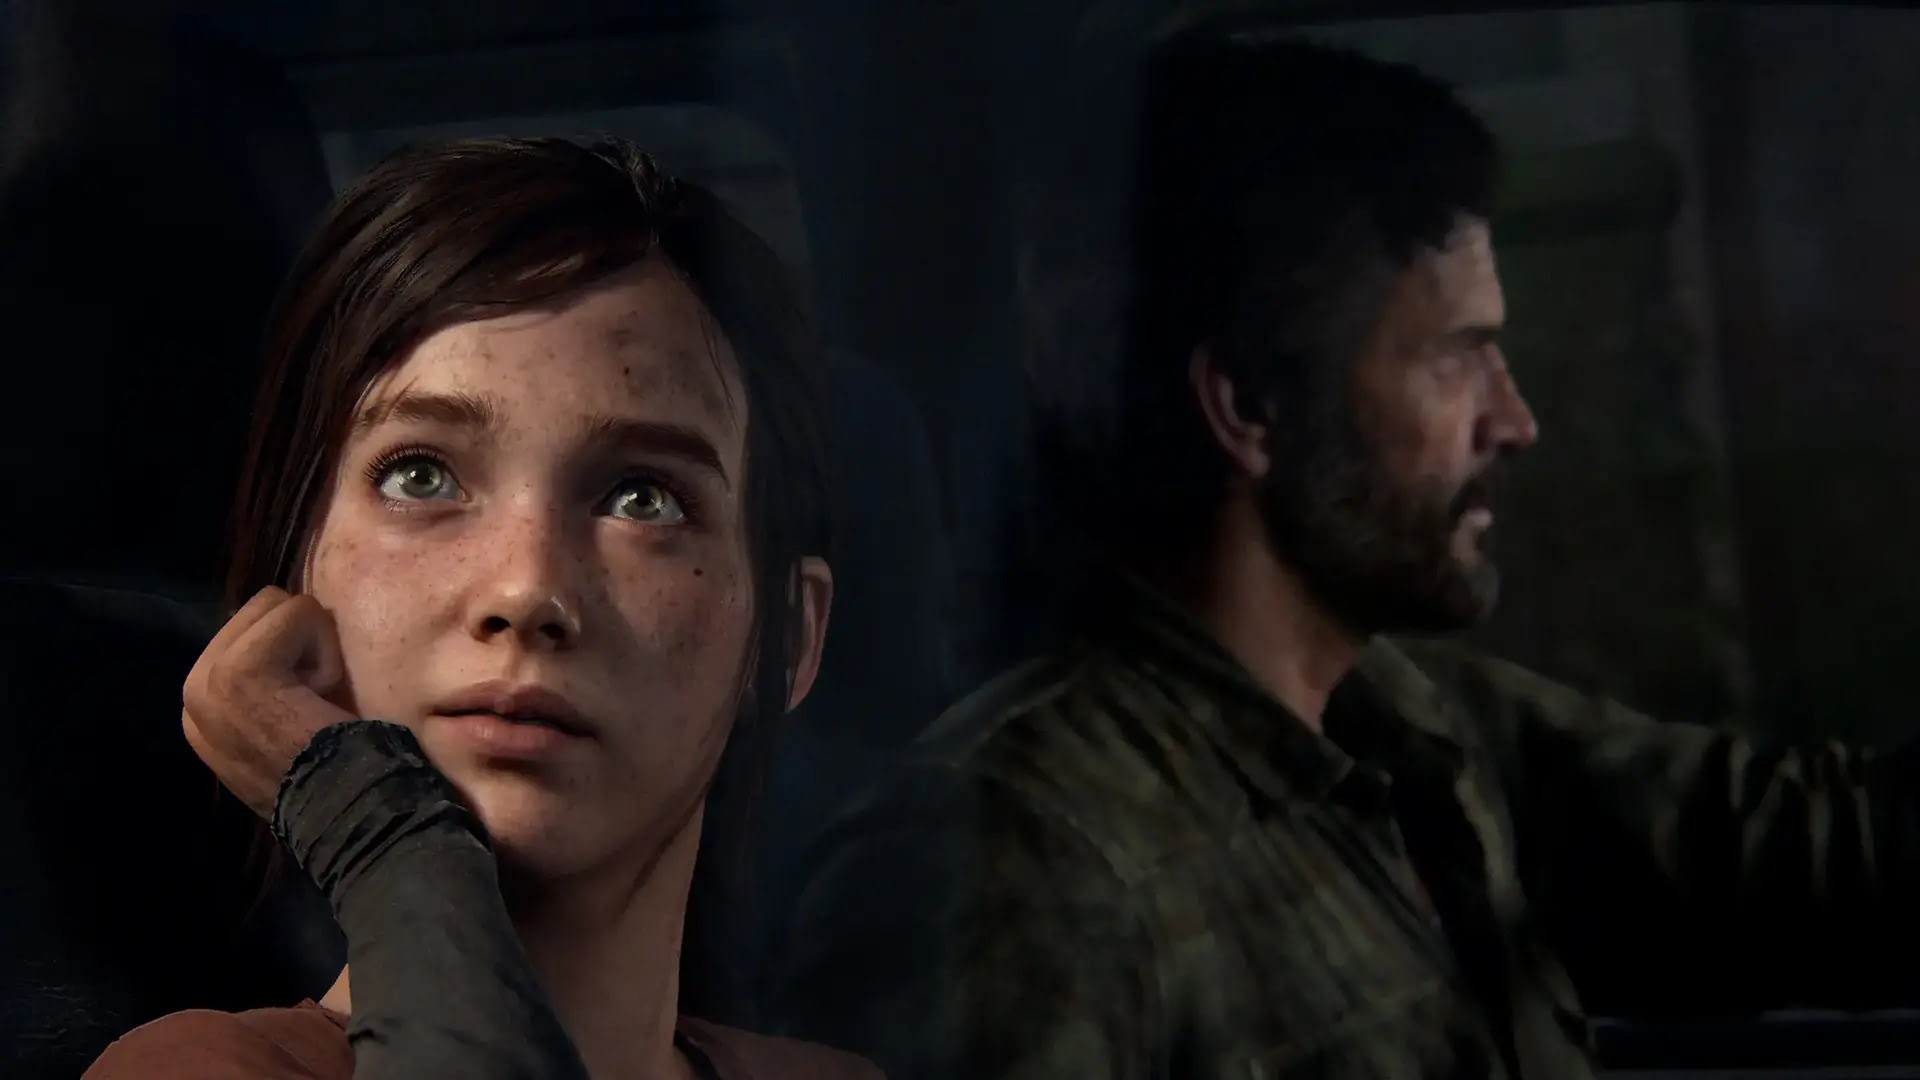 Last of Us Part I, Ellie looking out of the window of a car while Joel drives in the background